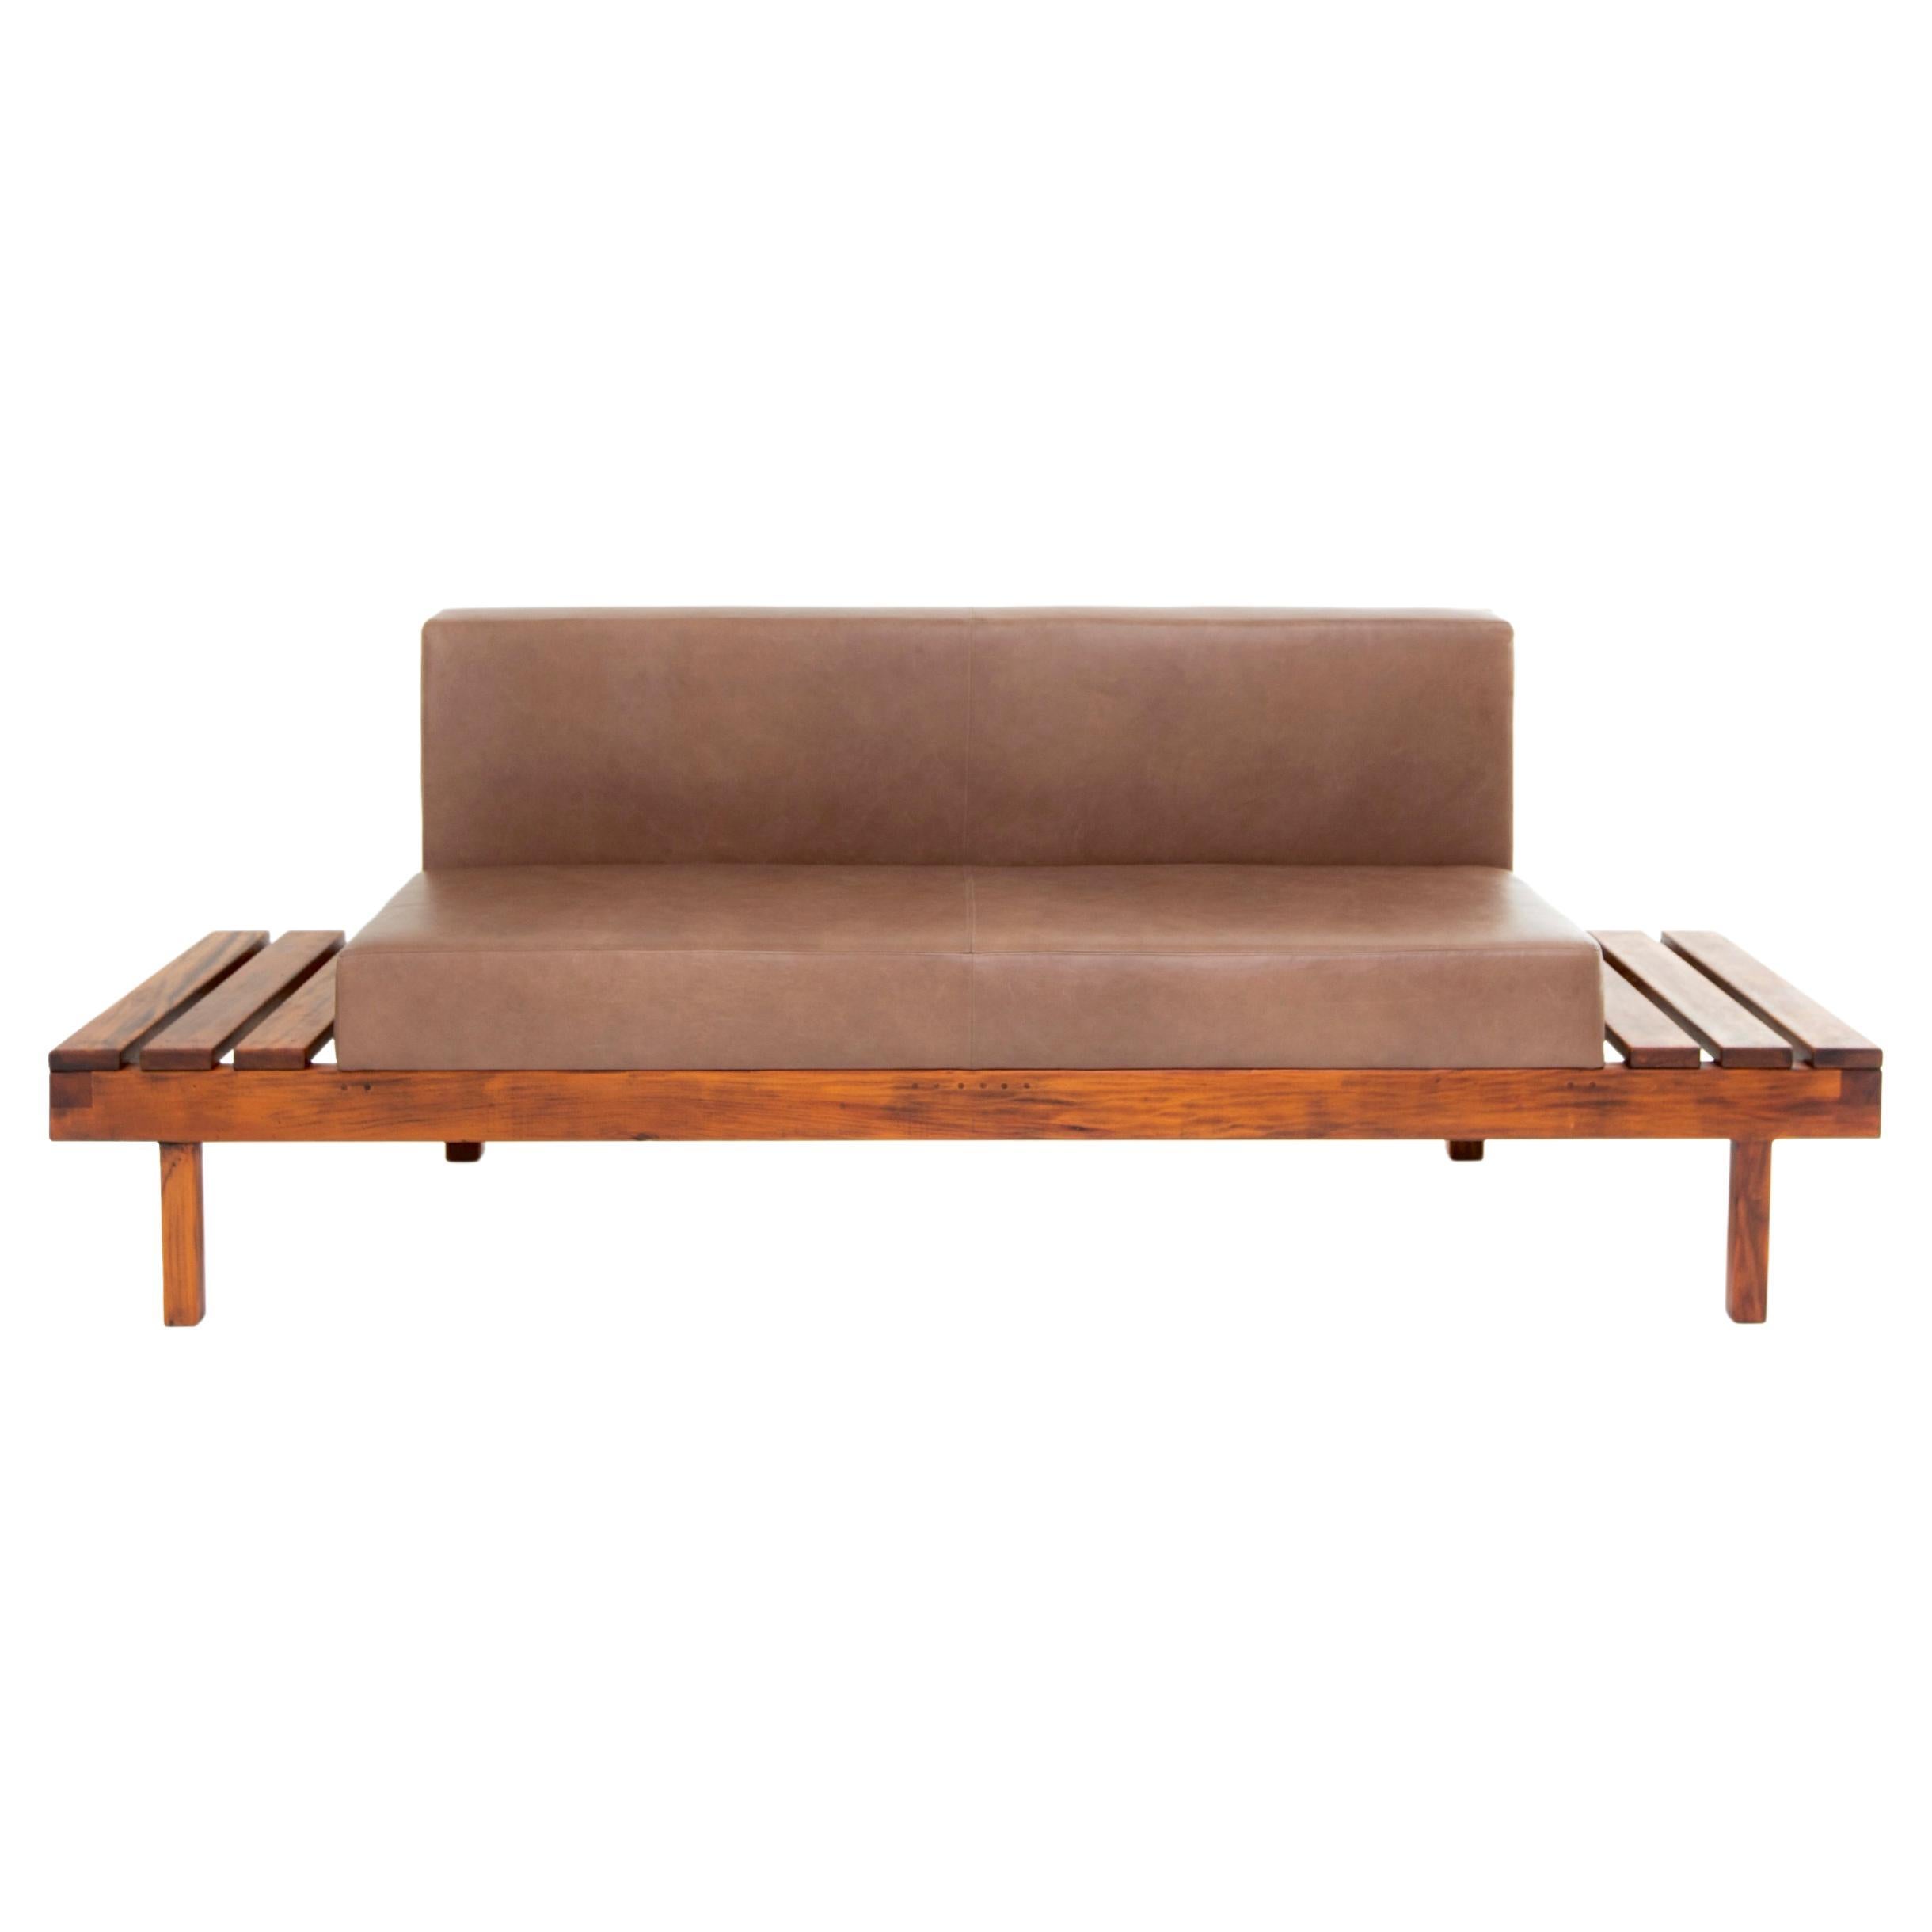 Minimalist Brazilian Handcrafted Sofa ''Trancoso" by Dimitrih Correa For  Sale at 1stDibs | contemporary handcrafted sofa